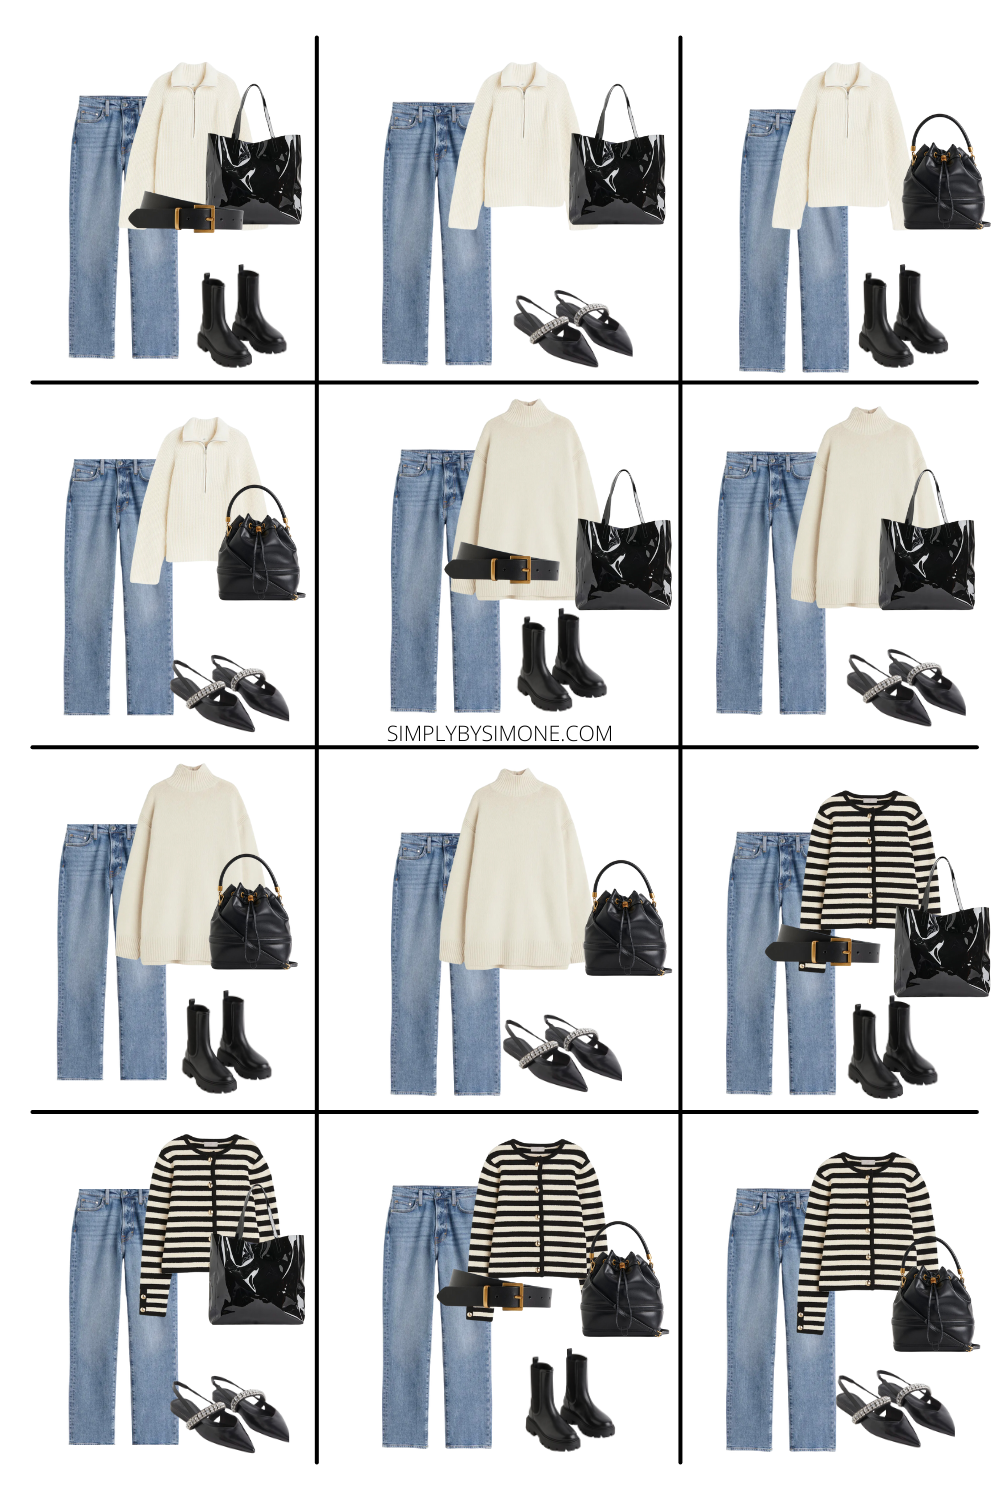 Collage three of 12 outfit ideas using 15 different items to create a winter capsule wardrobe 